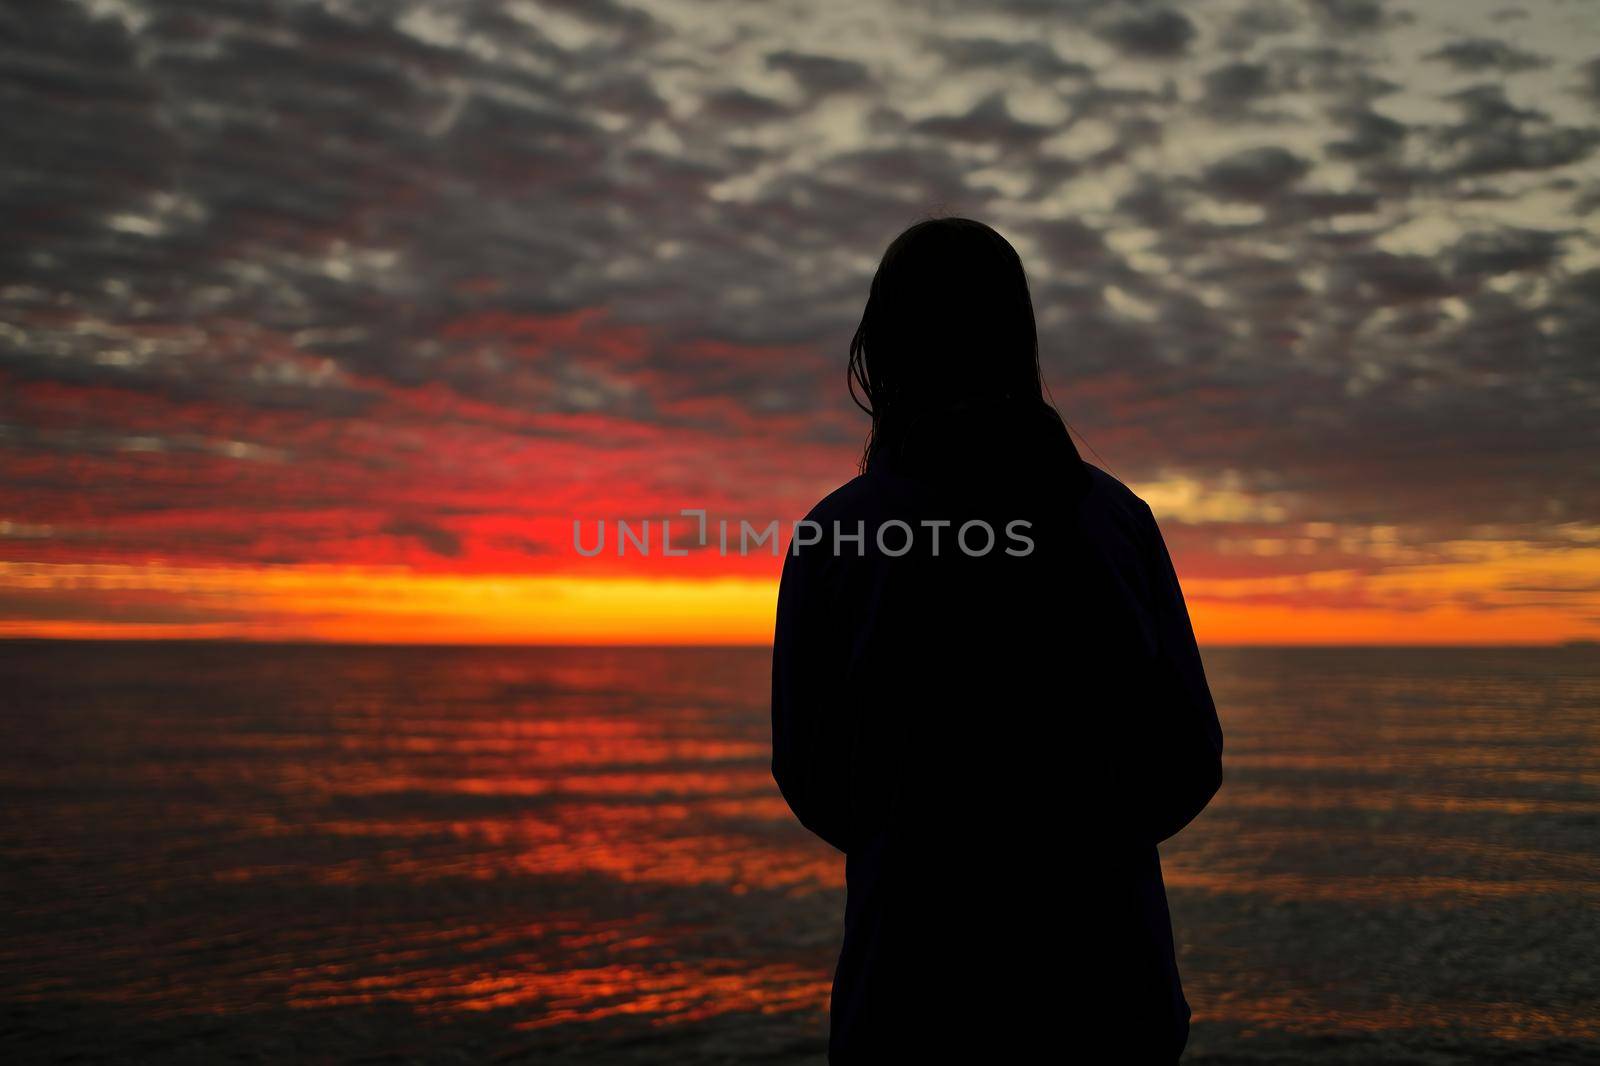 A Young Adolescent Girl Looks in Awe, Wonder, and Admiration at a Magnificent Sunset Sky by markvandam